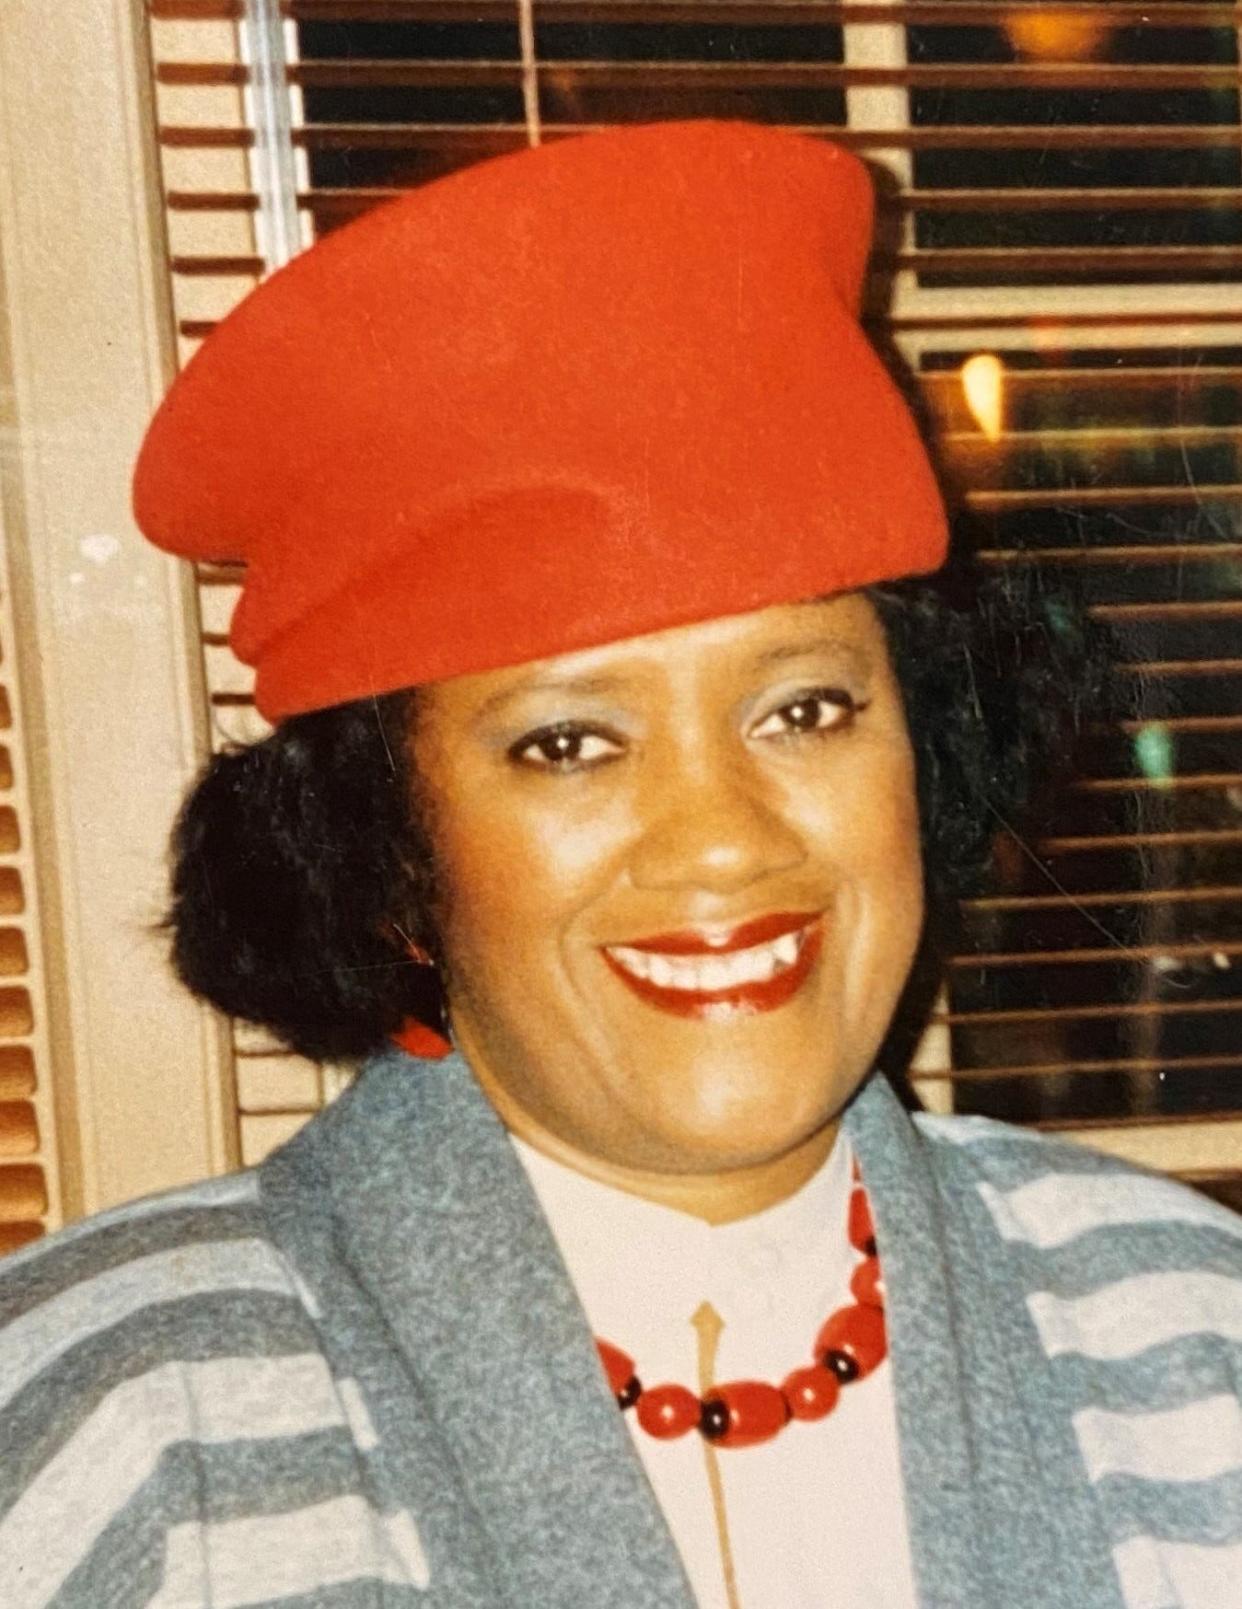 Saline Jones came to Monroe in 1953 and served as the chair of NAACP Monroe Chapter 3164’s “Fight for Freedom” committee for 15 years. She died Oct. 15, 2020 at age 81.